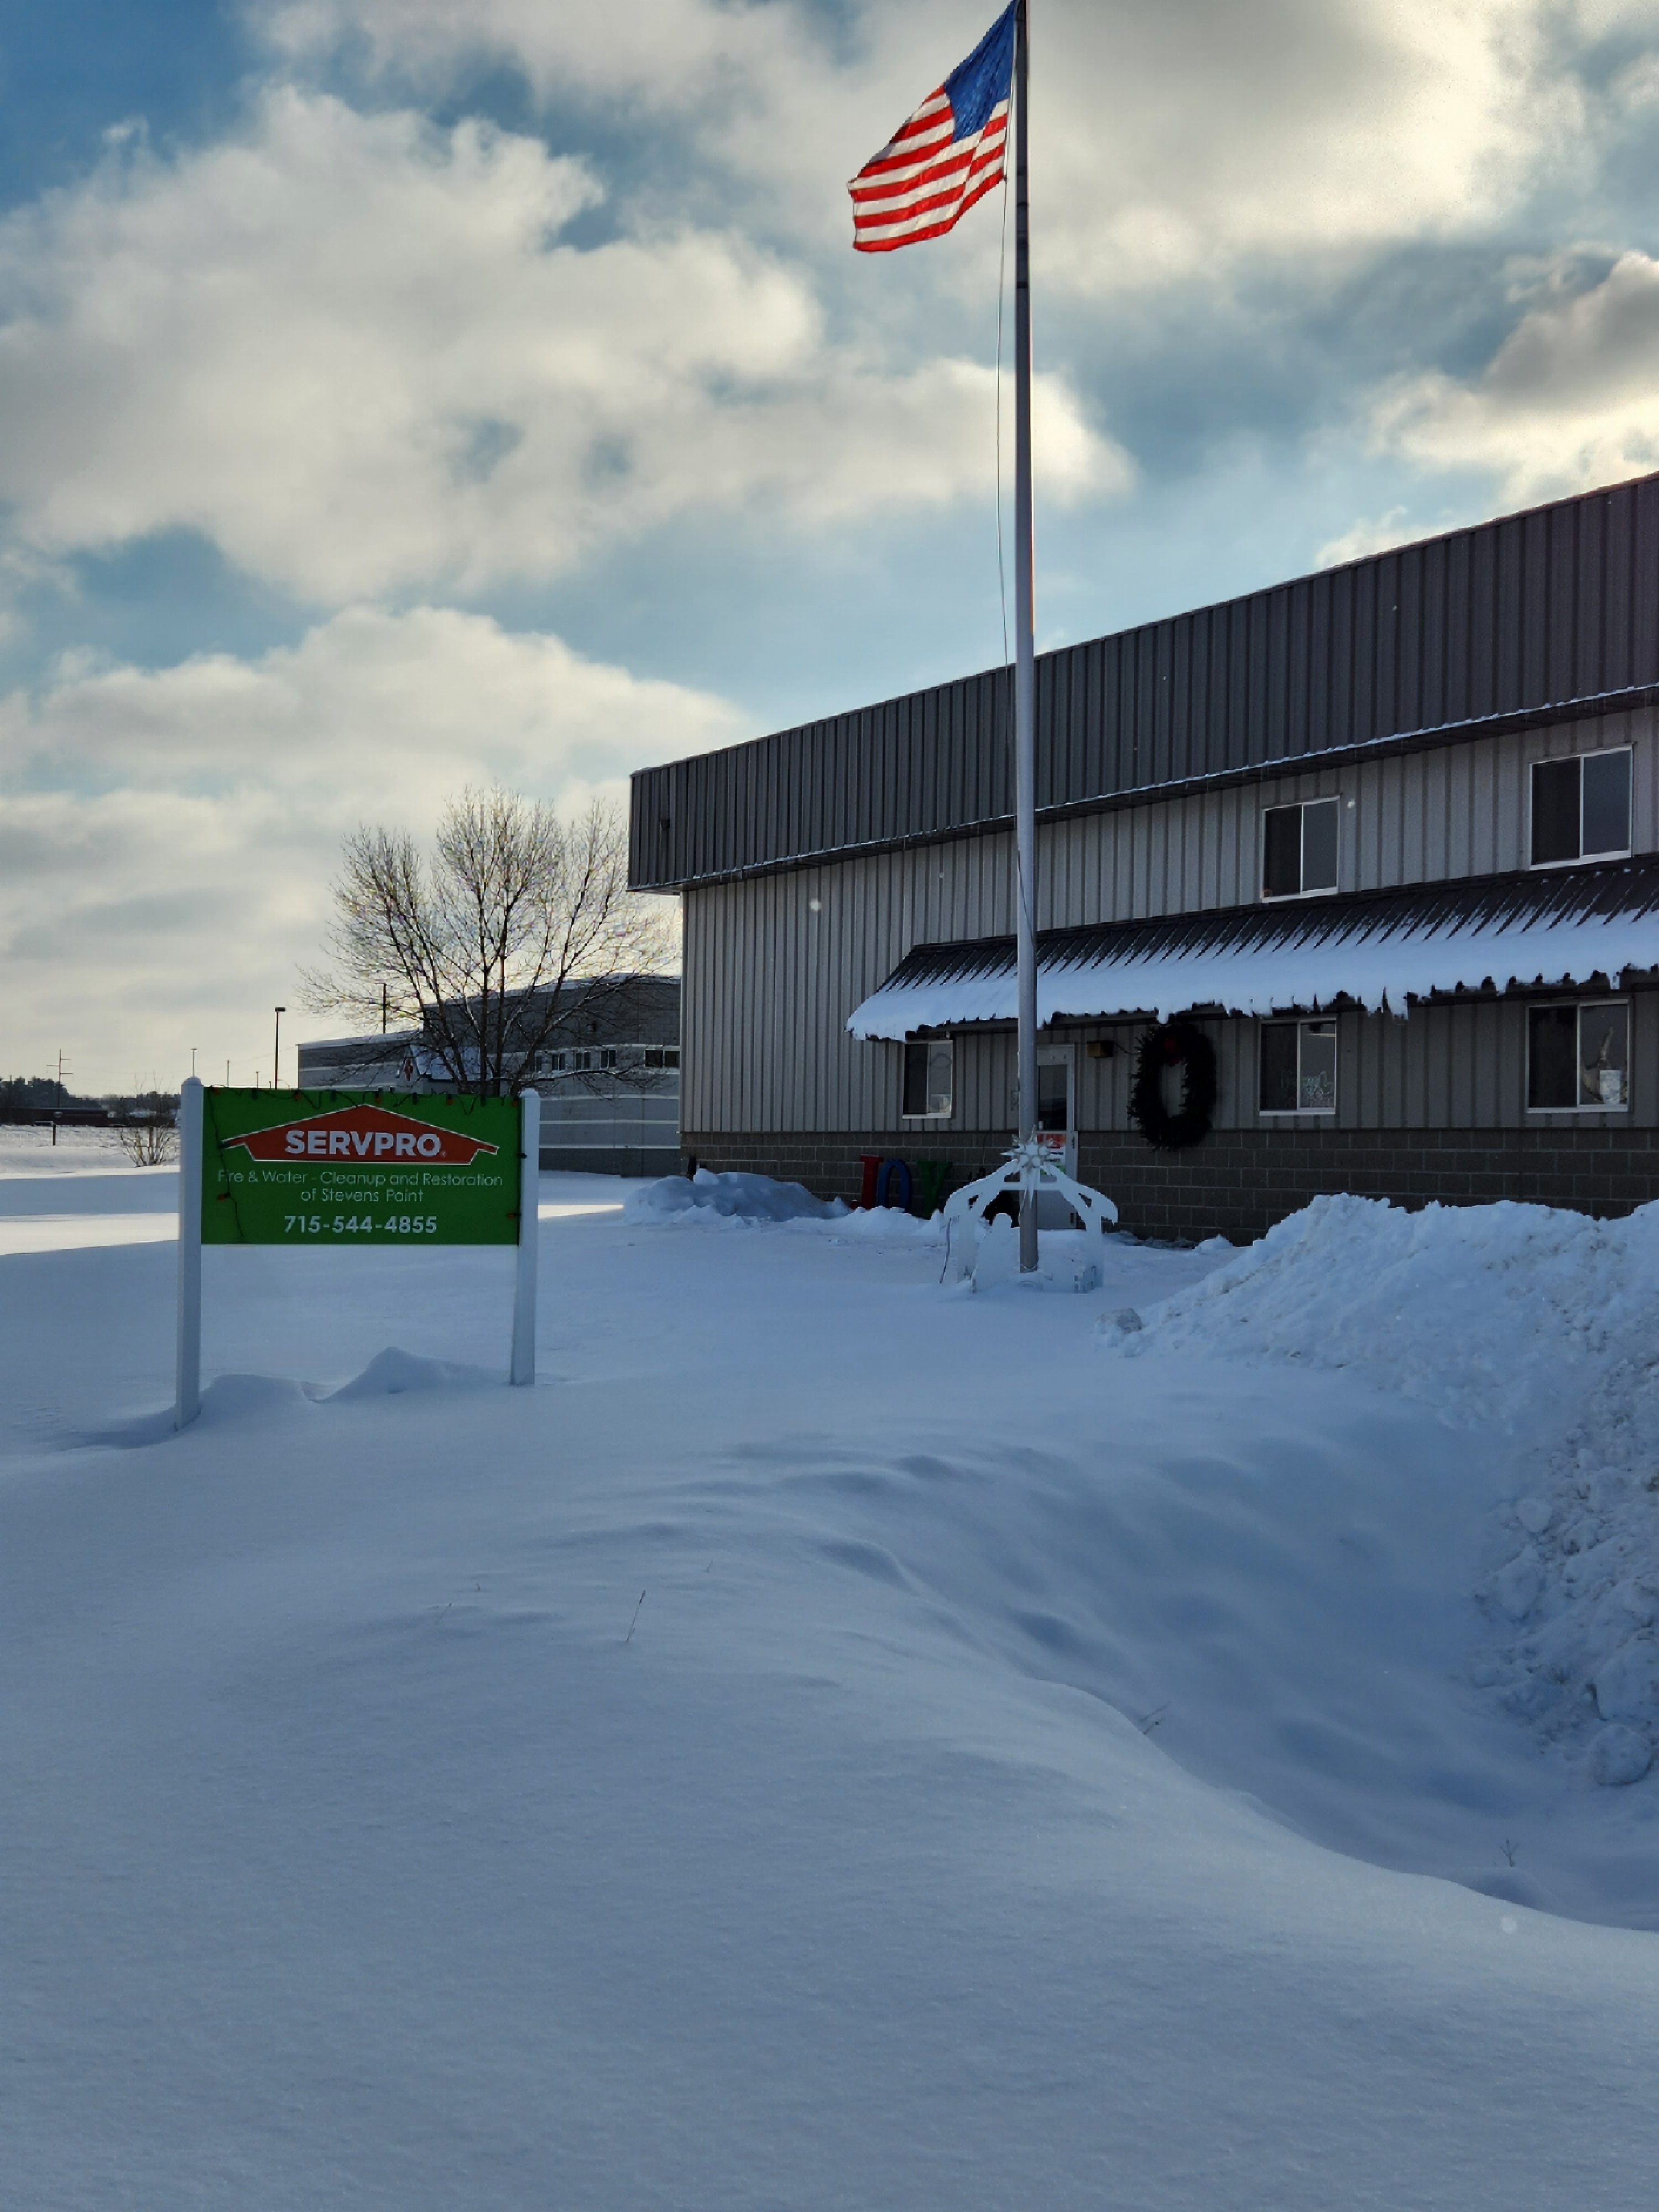 Servpro of Stevens Point, Wausau, and Wisconsin Rapids/Marshfield Headquarters